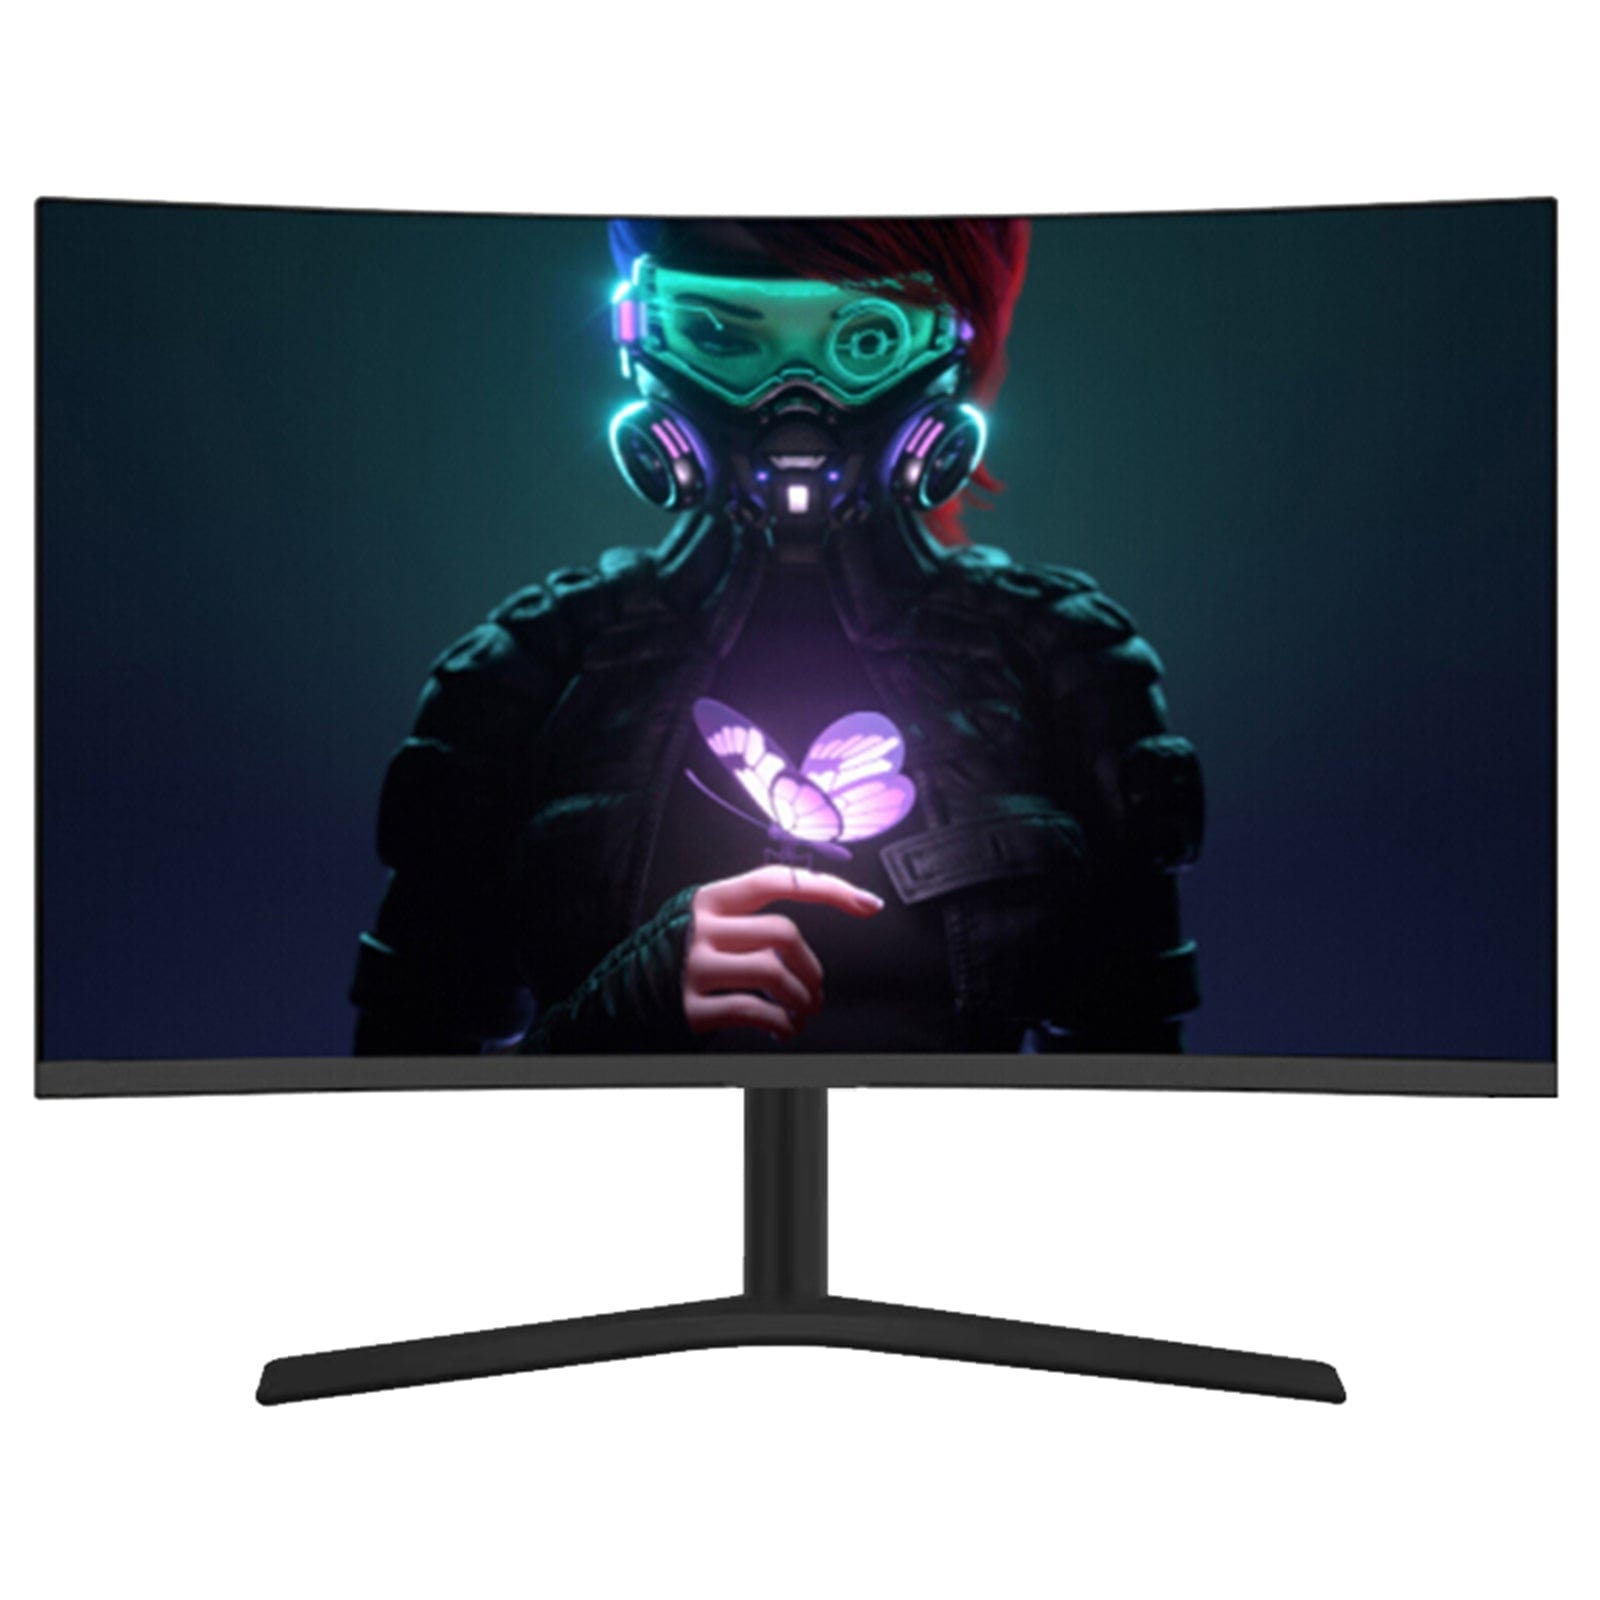 27" Curved LED Panel 2560x1440p Refresh Rate 165HZ Monitor Aspect Ratio 16:9